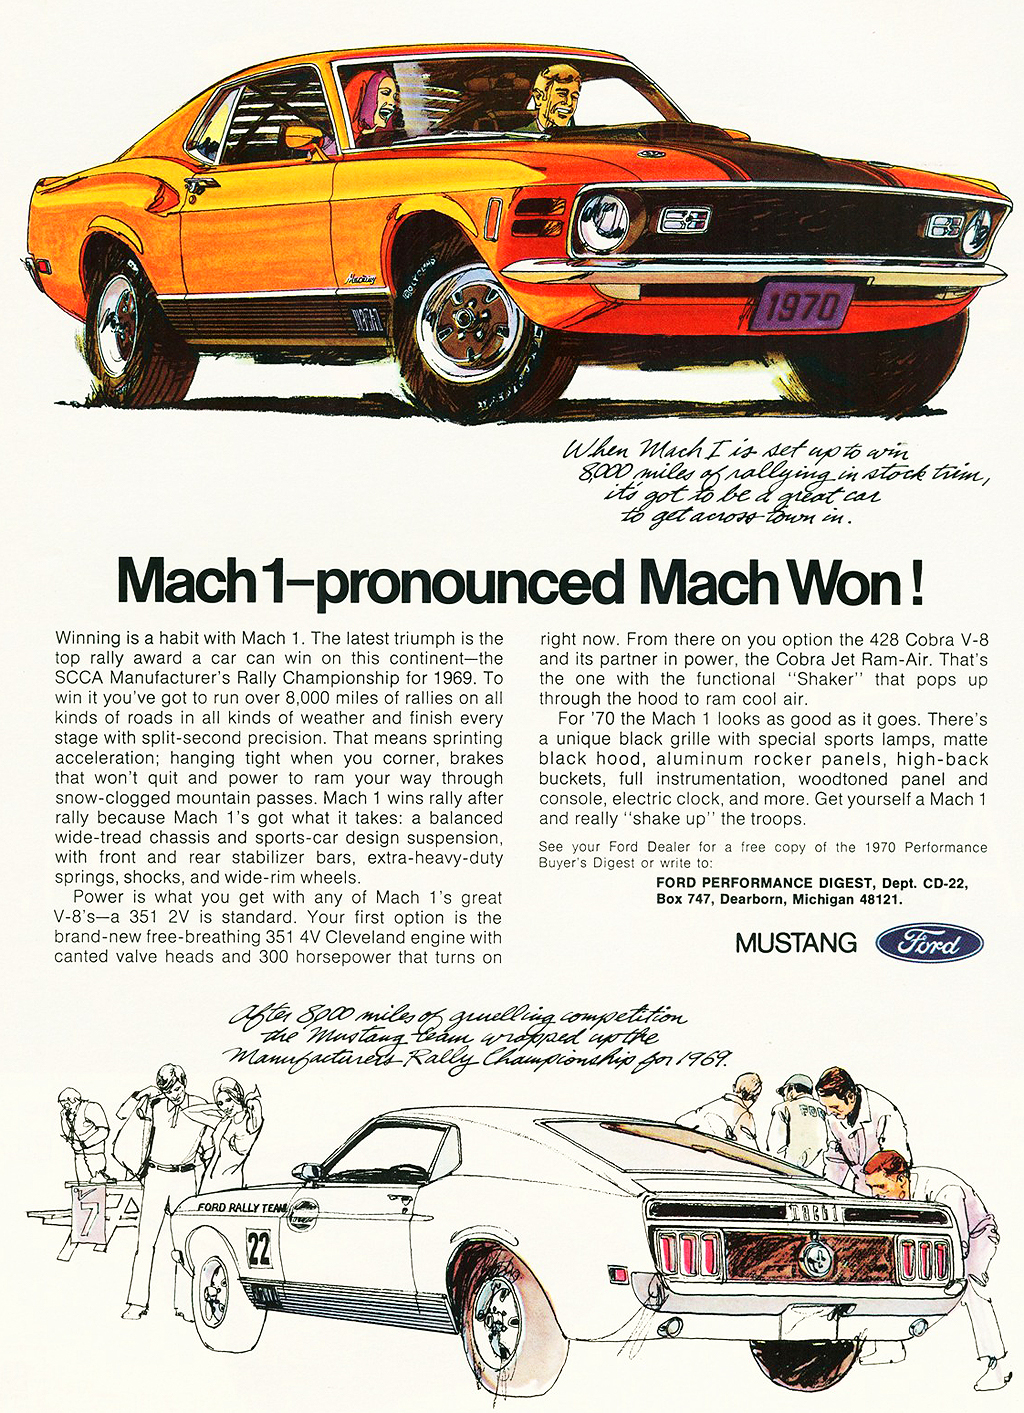 1970 Ford Mustang Mach 1 ad | CLASSIC CARS TODAY ONLINE